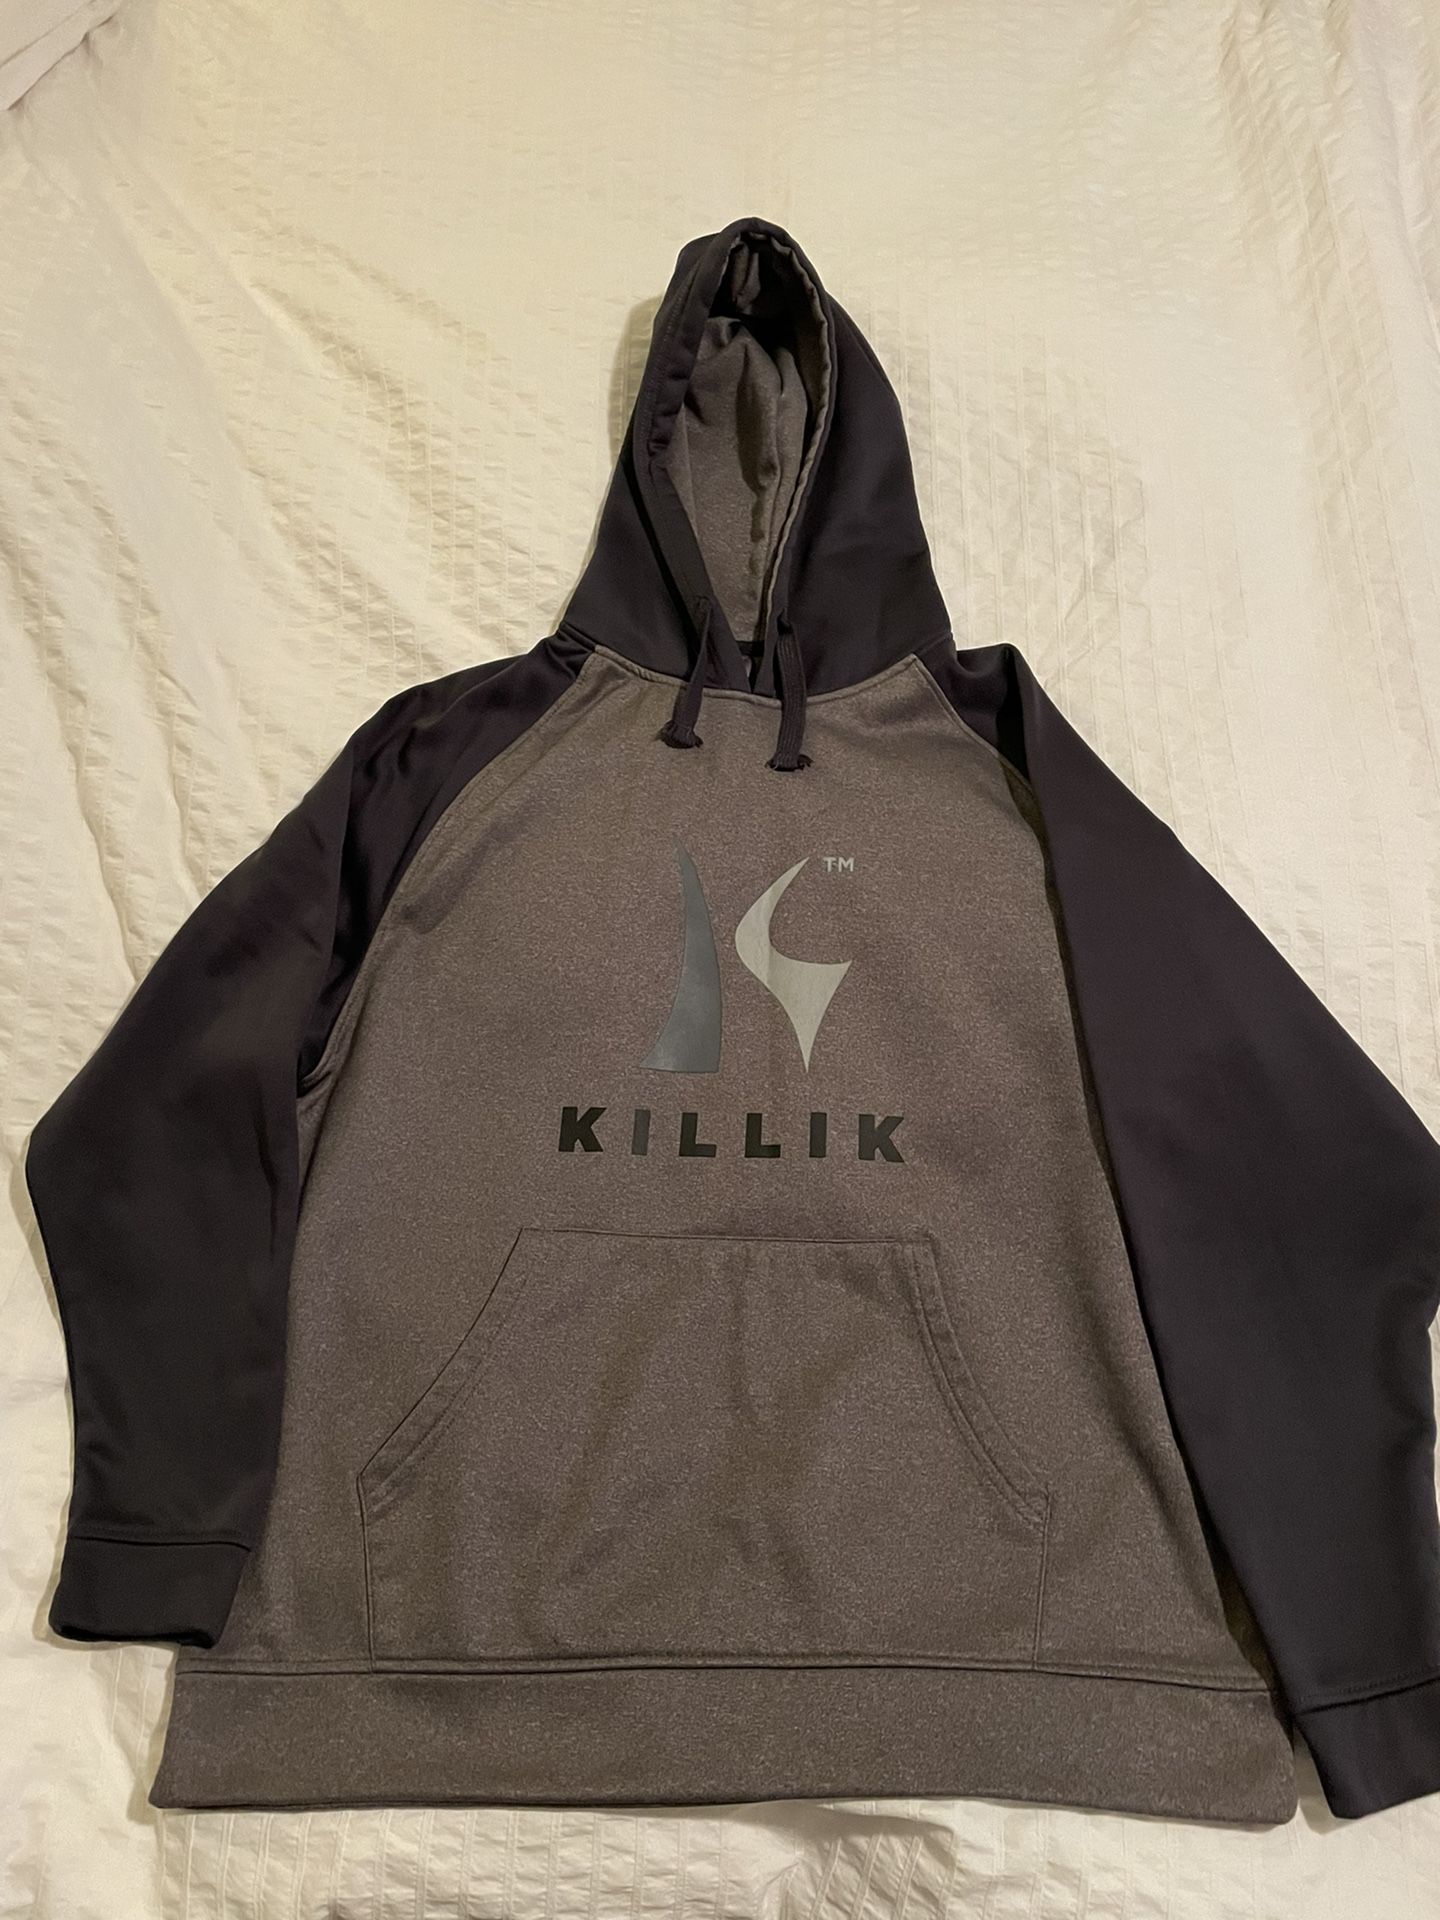 Large Men’s Hoodie , Perfect Condition 